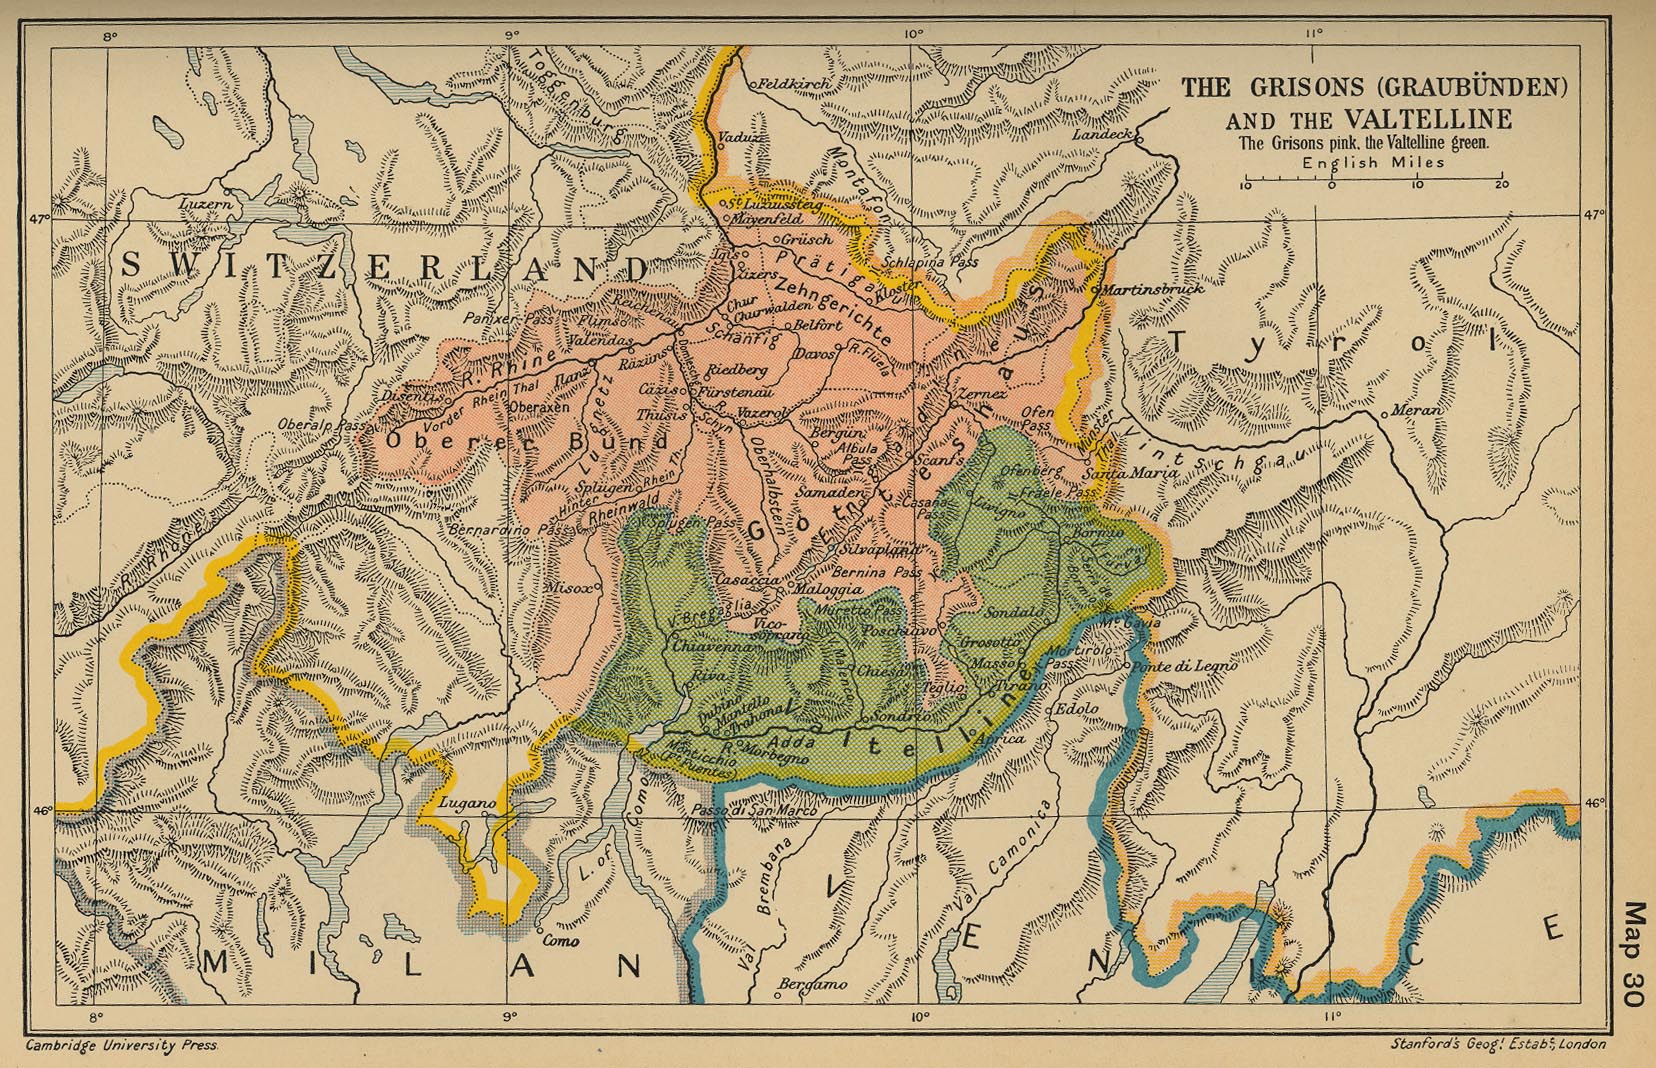 Map of the Grisons and the Valtelline